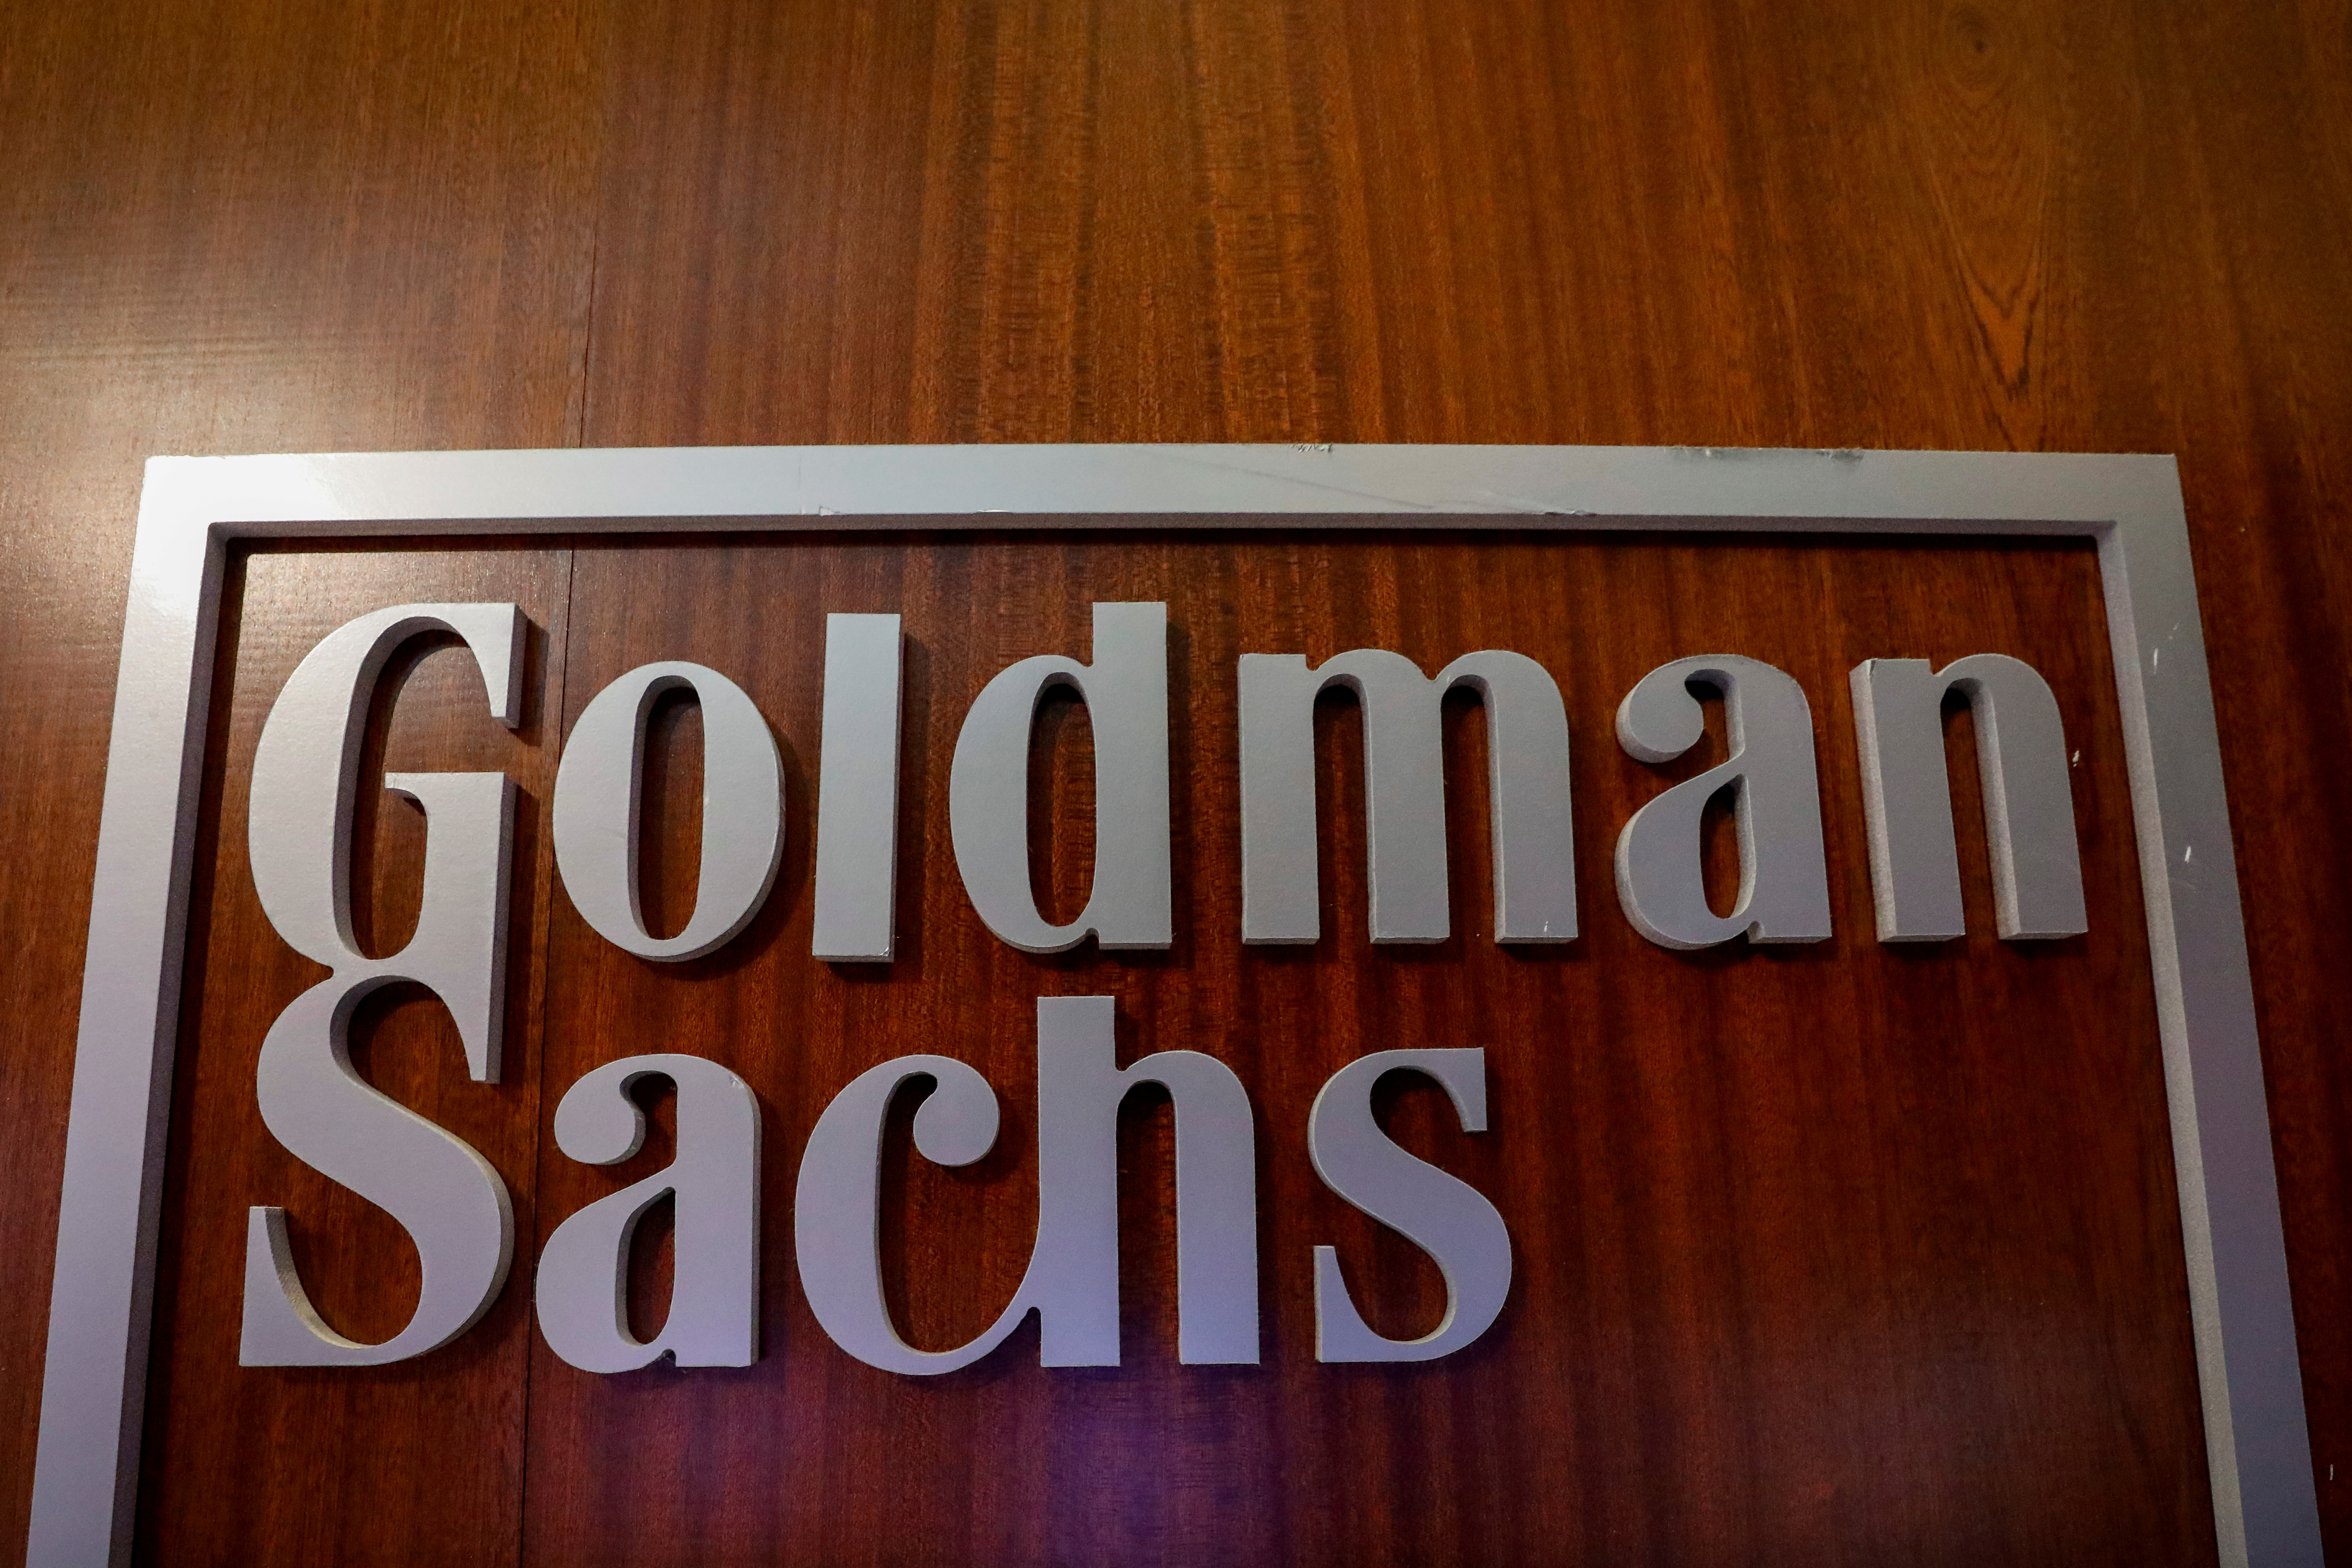 Goldman Sachs to pay $3 billion to settle charges over 1MDB scandal role